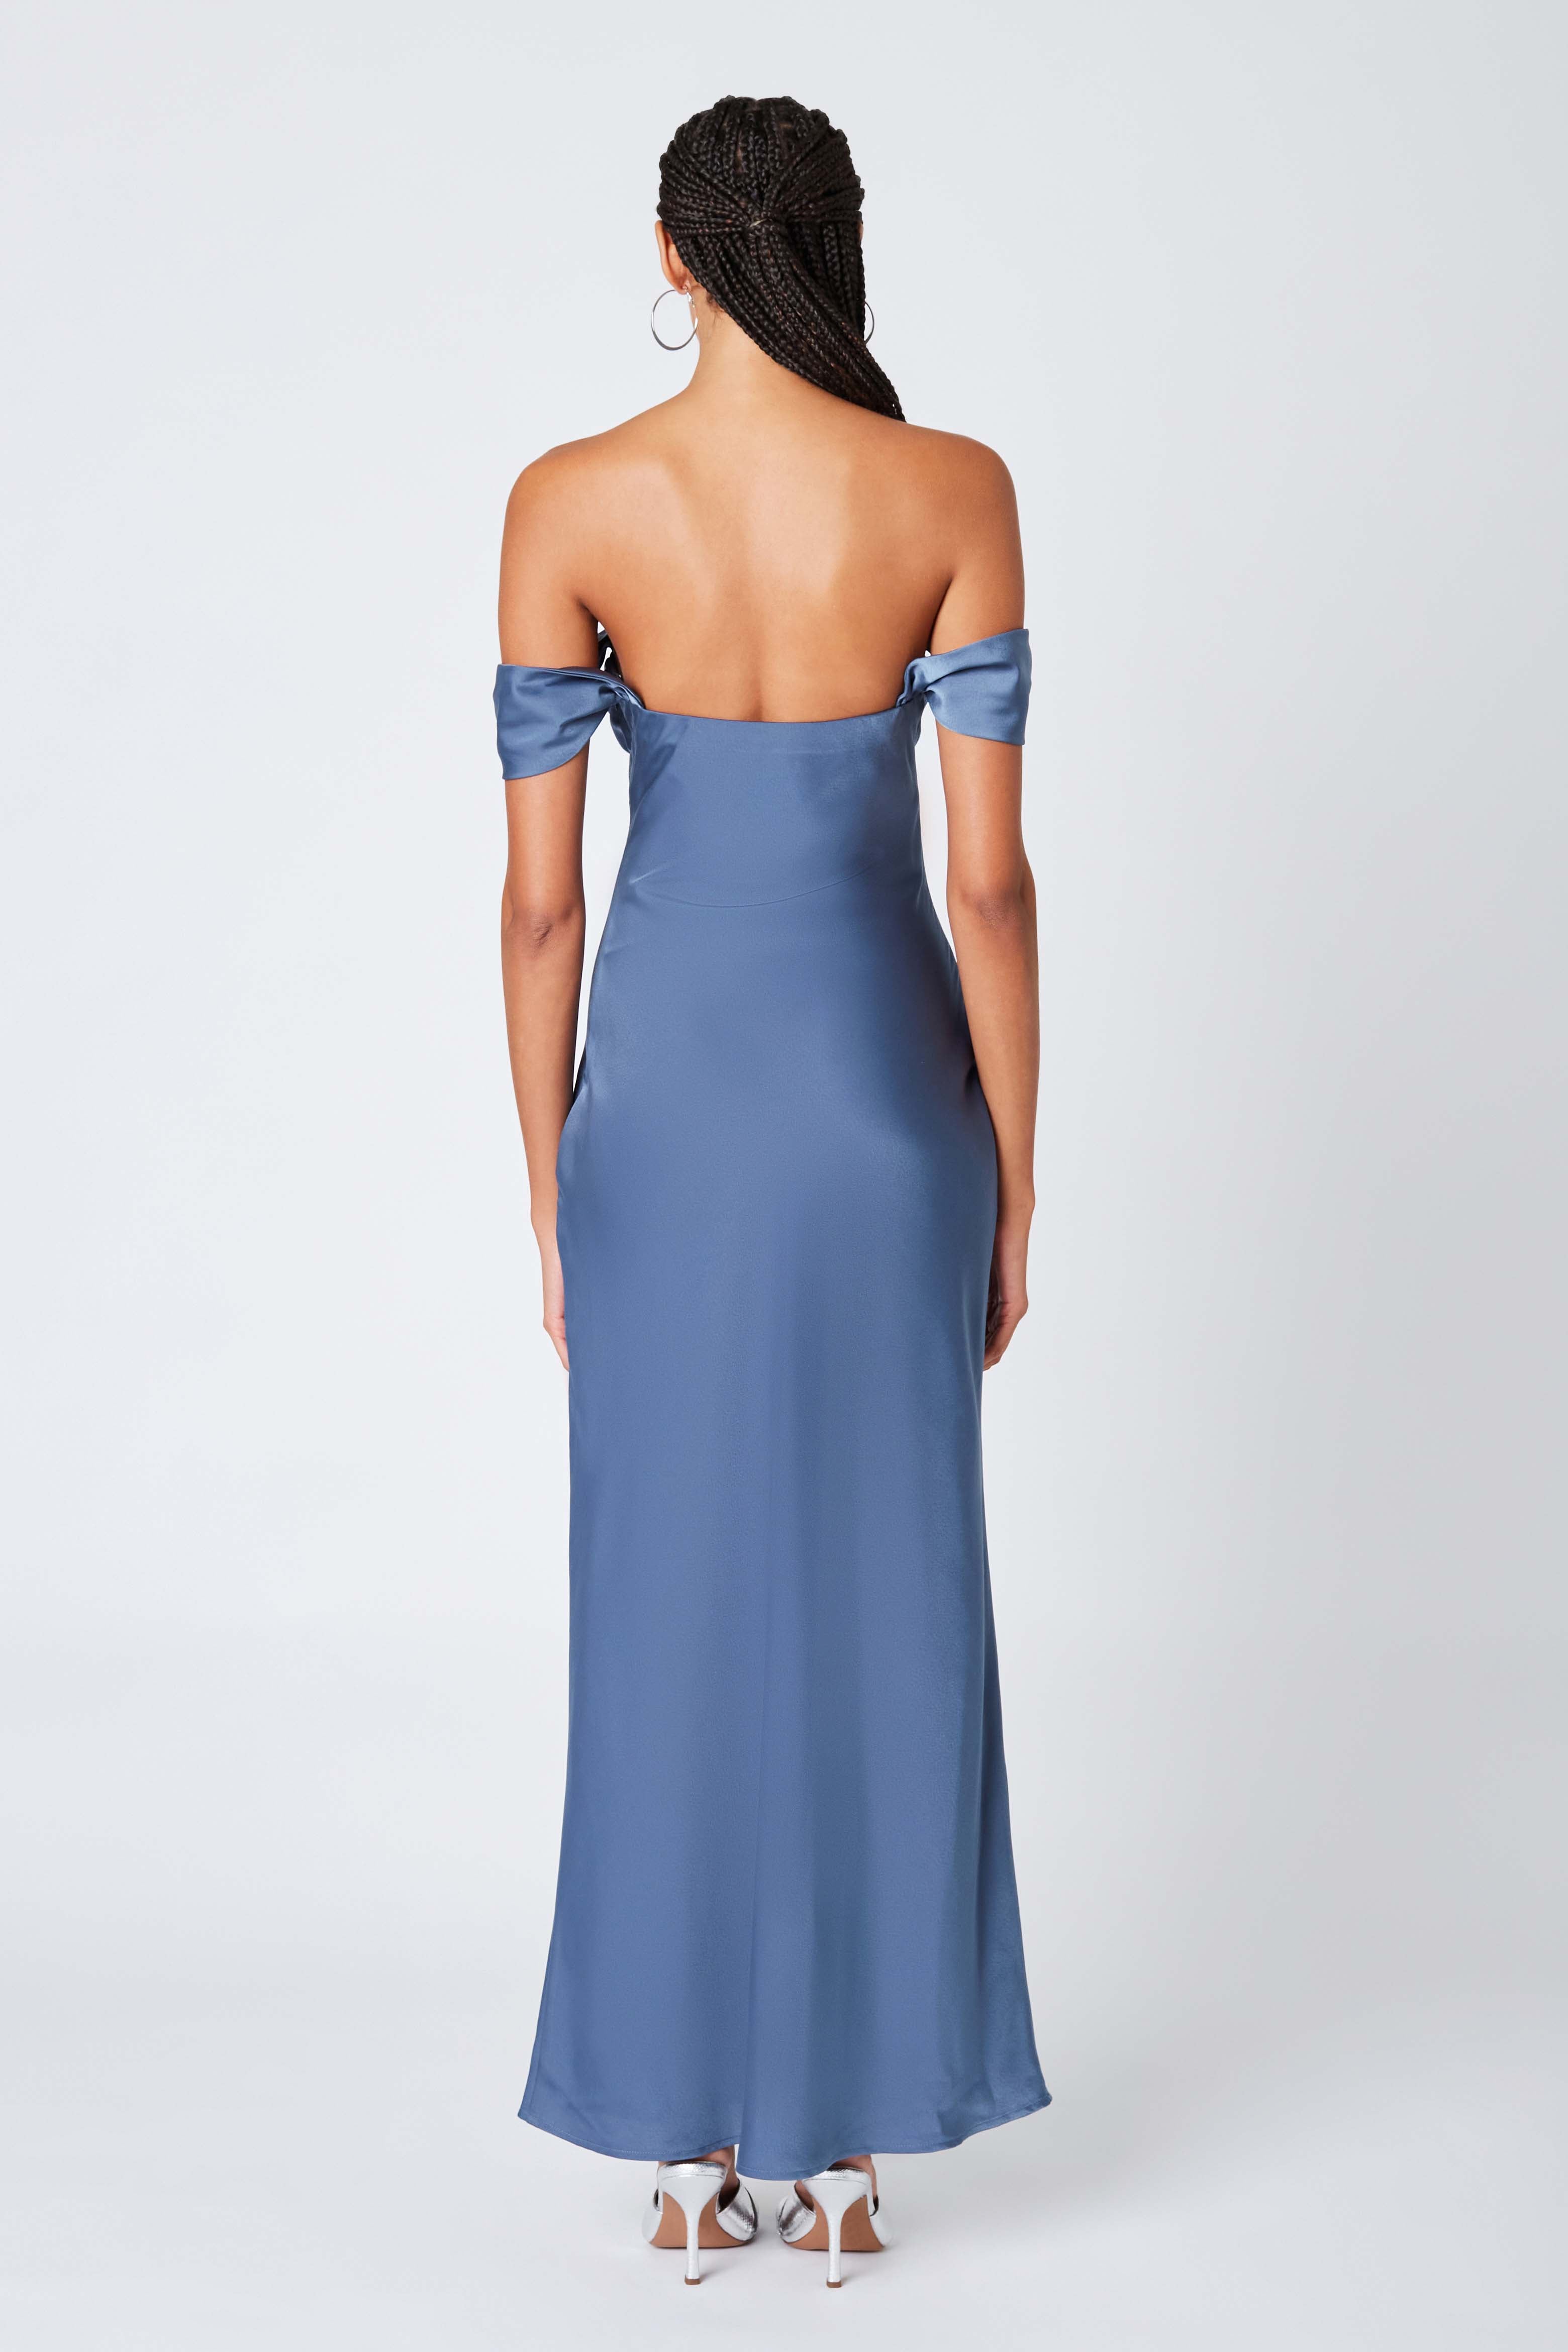 Satin Off the Shoulder Maxi Dress in Bluesteel Back View